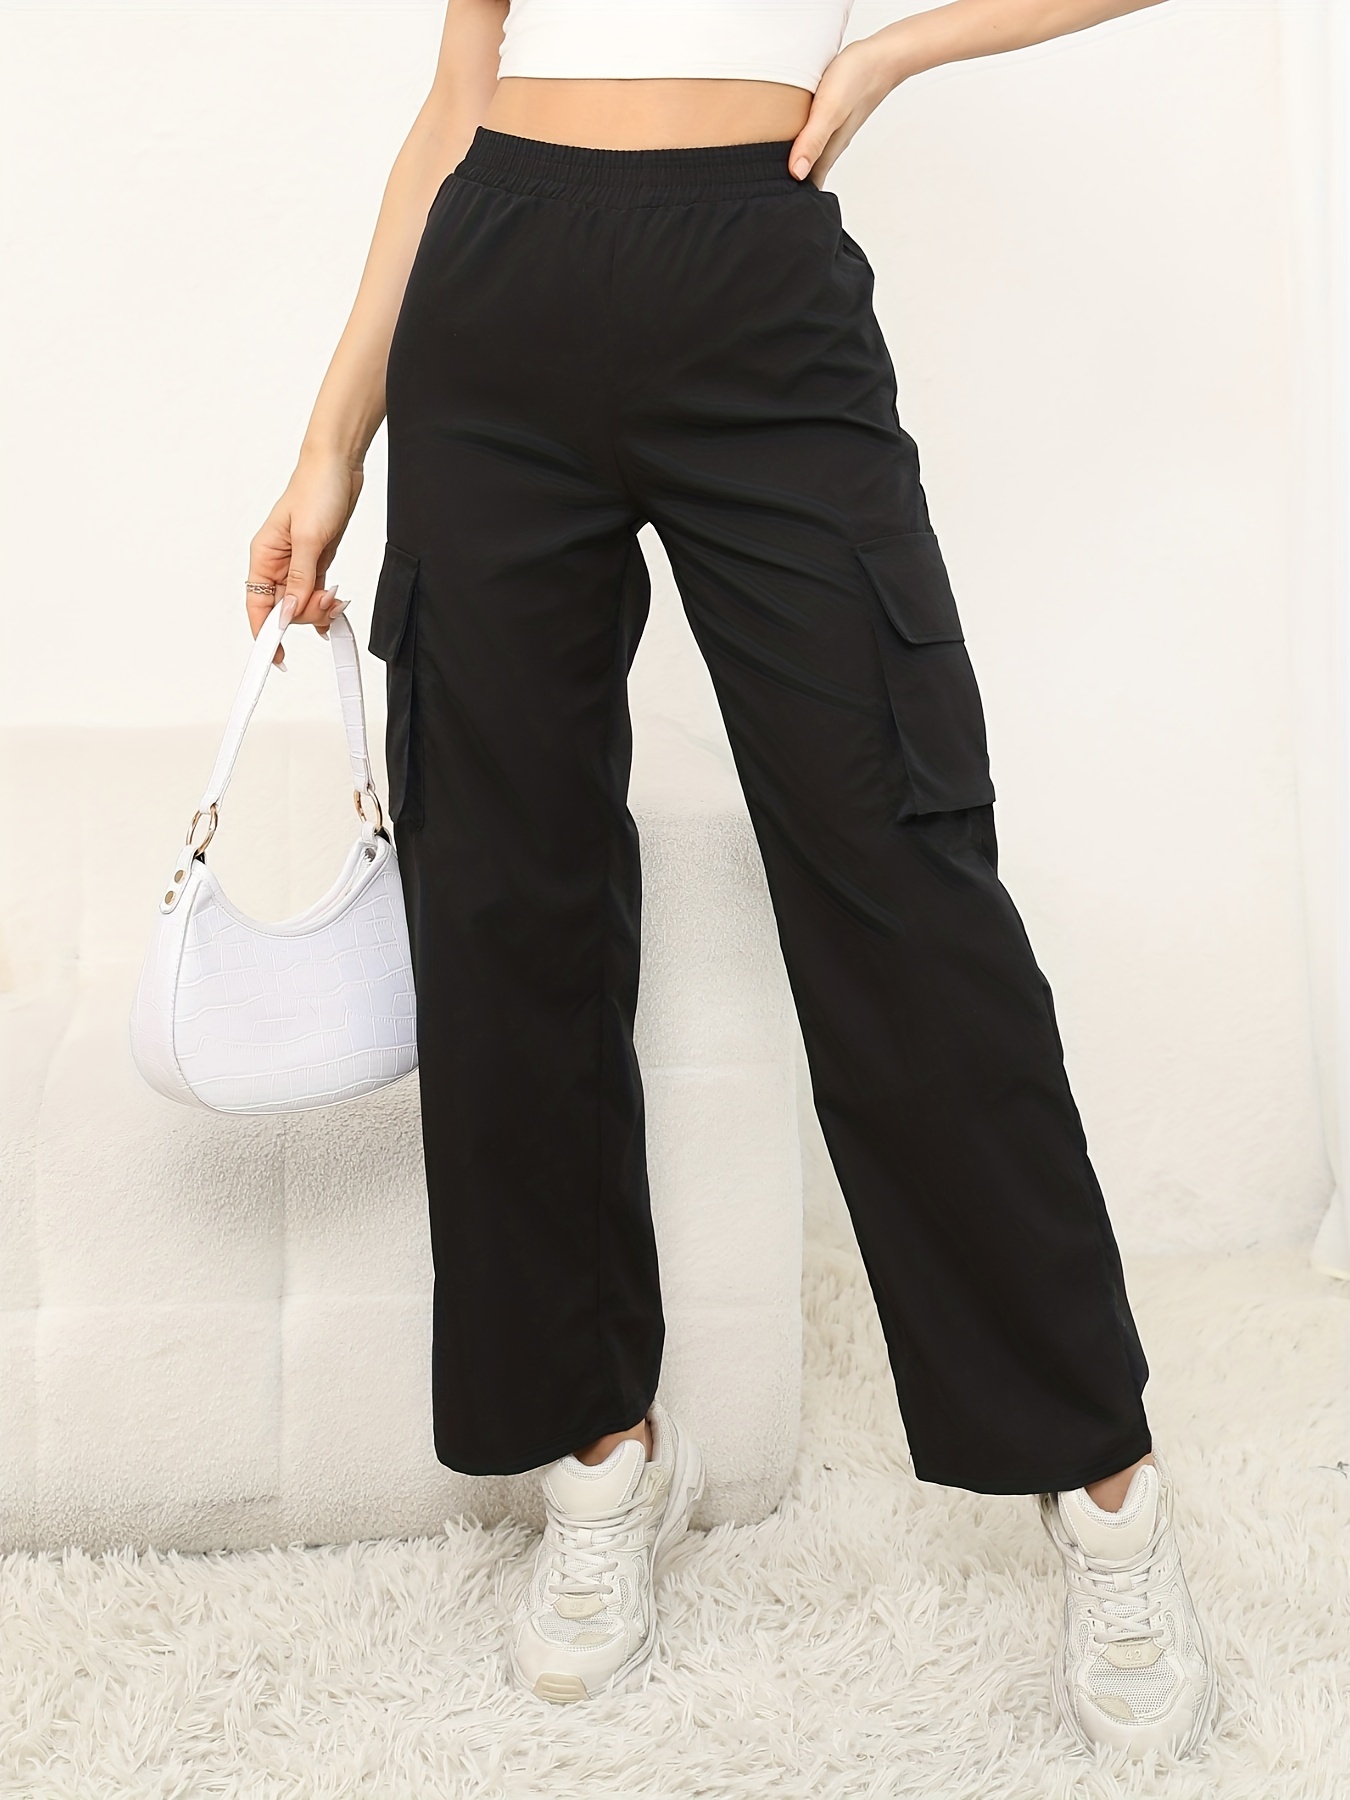  Business Casual Pants for Women Linen Wide Leg Pants for Women  High Waisted Loose Fit Drawstring Pantss Casual Work Pants Trouser with  Pocket Flowy Pants for Women Wide Leg Trousers Women 